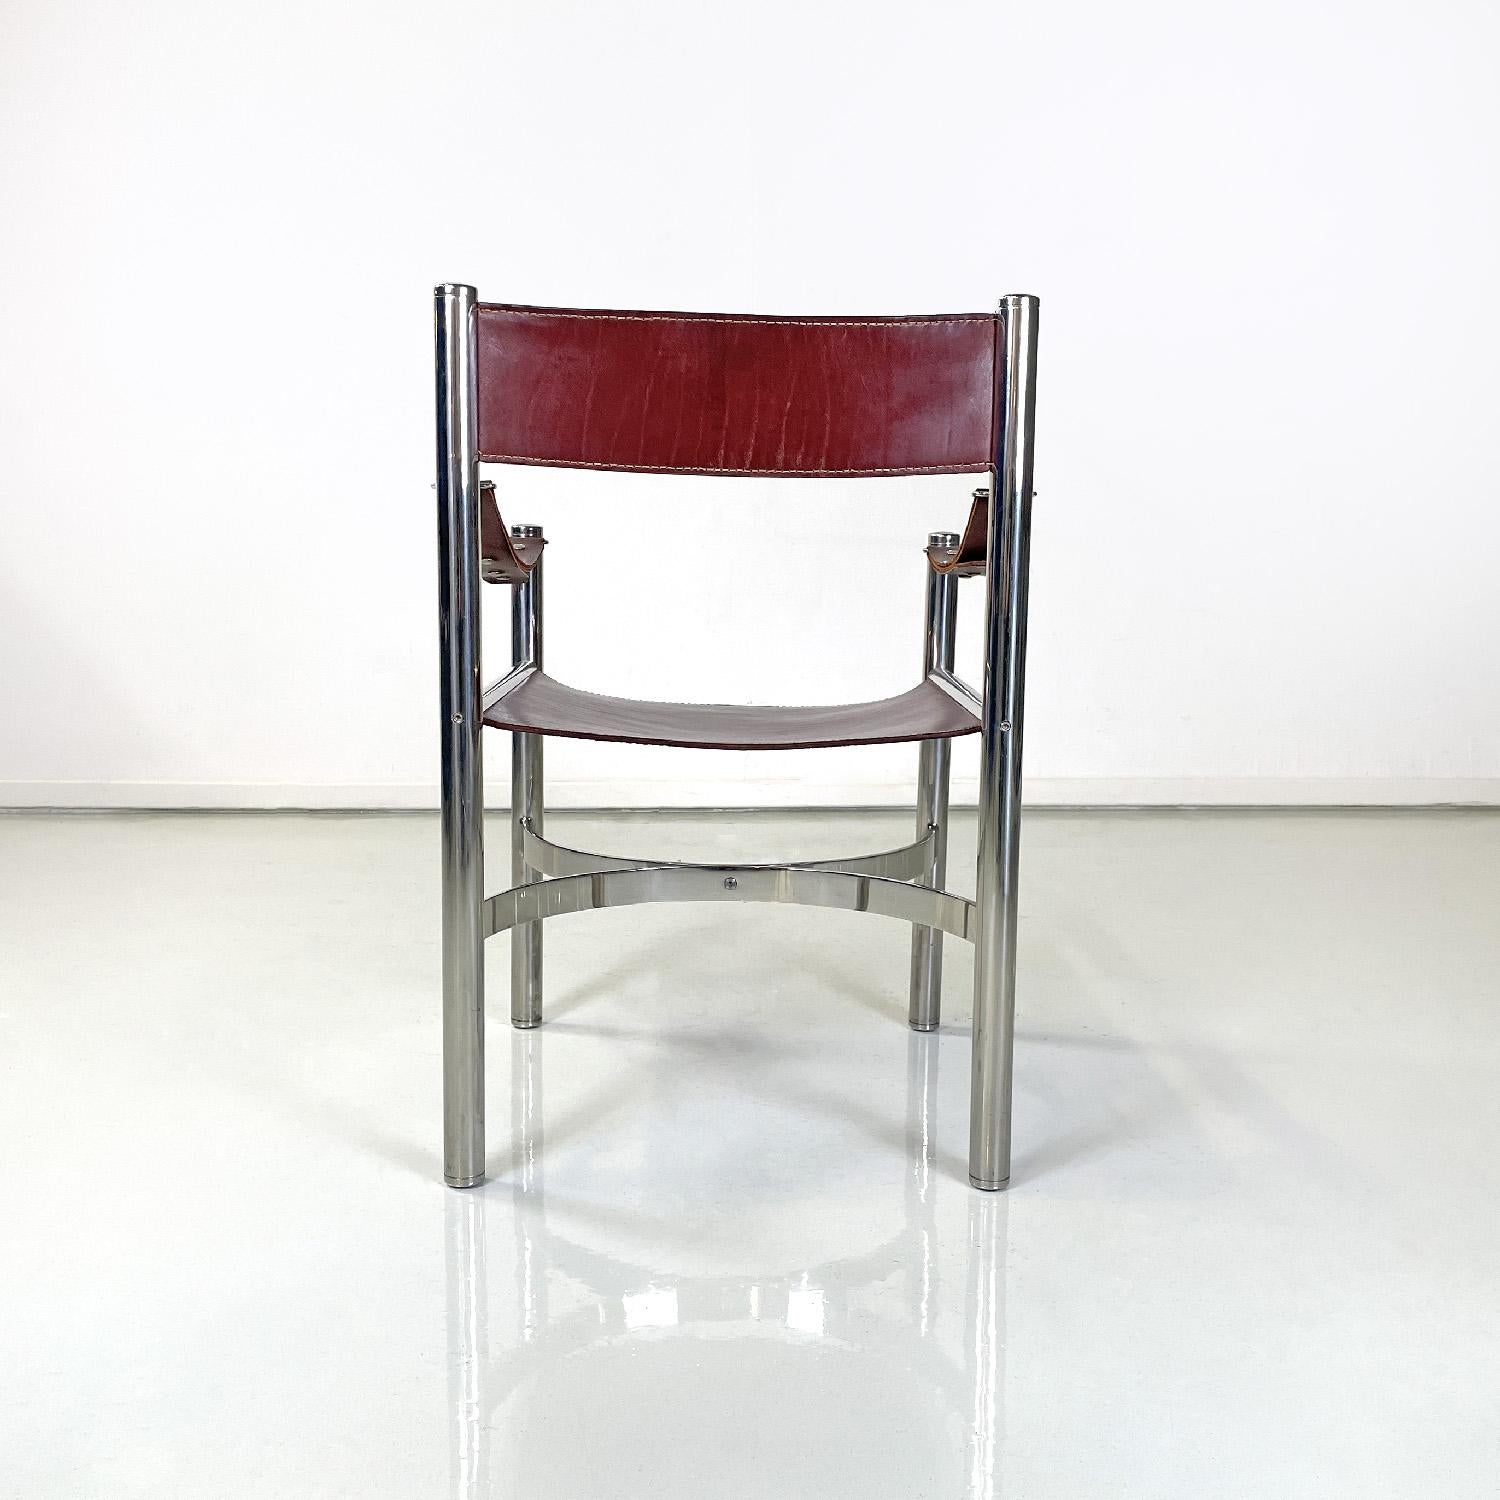 Leather Italian modern brown leather chairs with chromed steel structure by D.I.D, 1970s For Sale